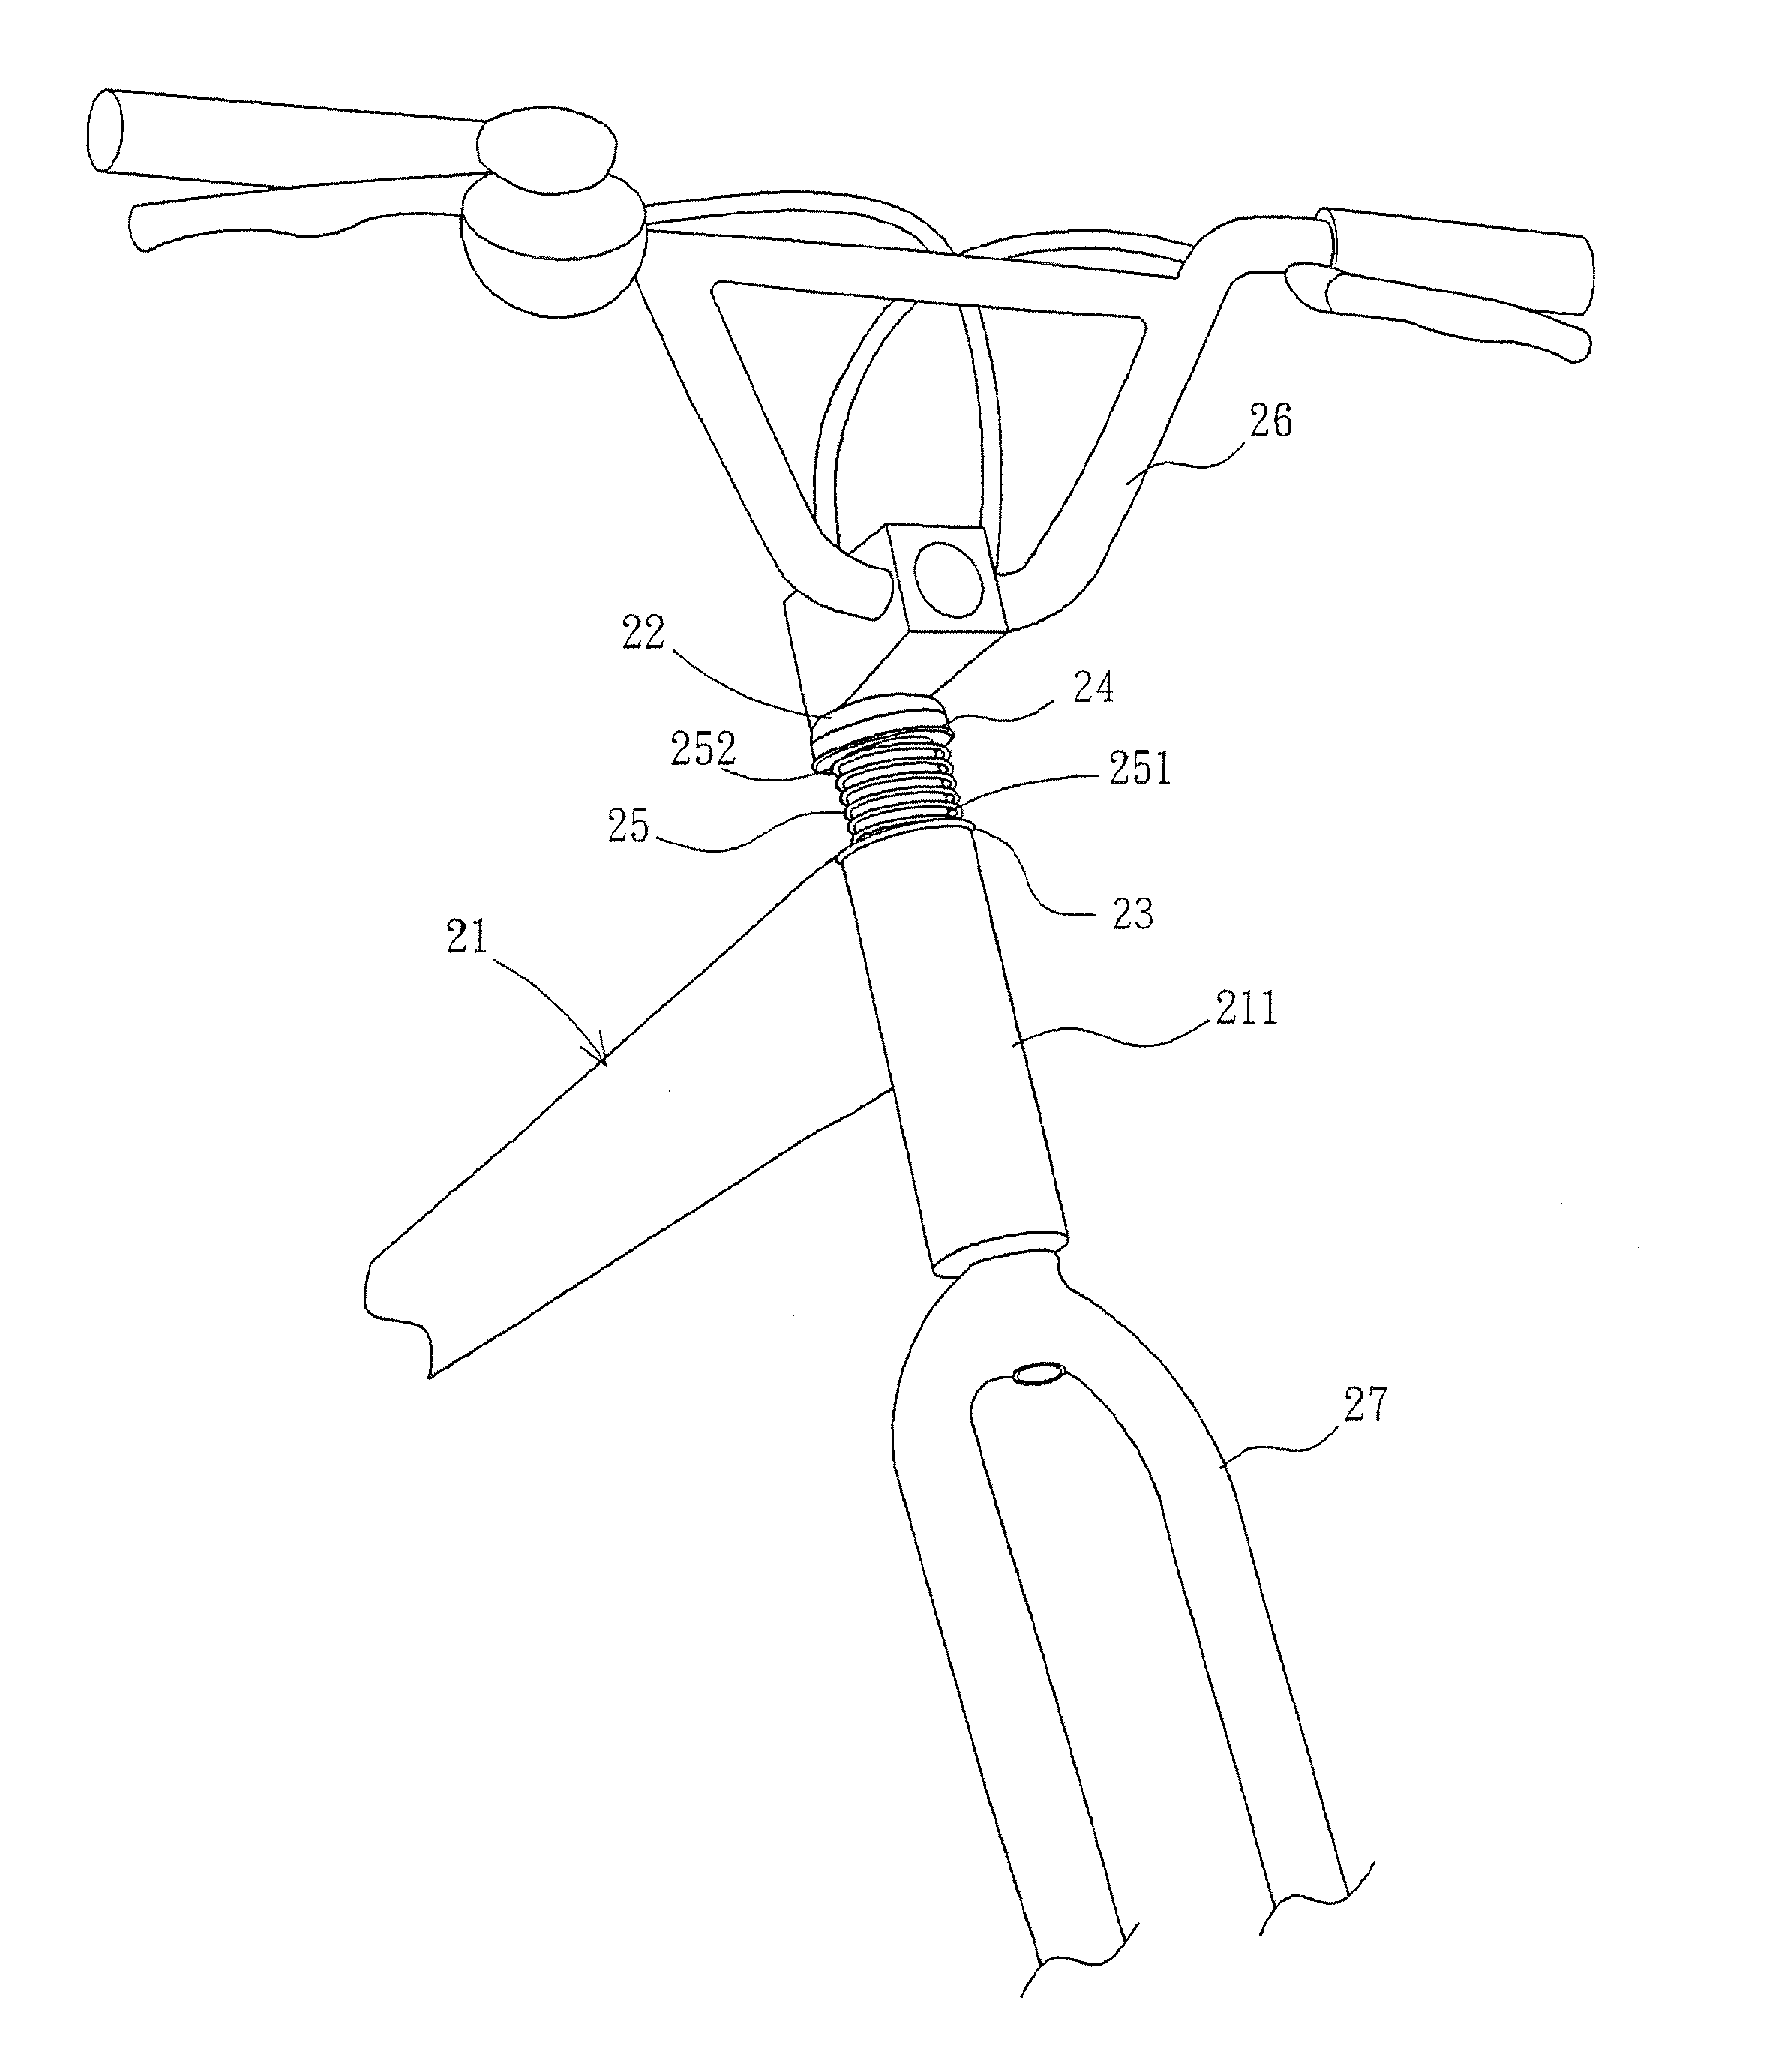 Steering safety mechanism for bicycle